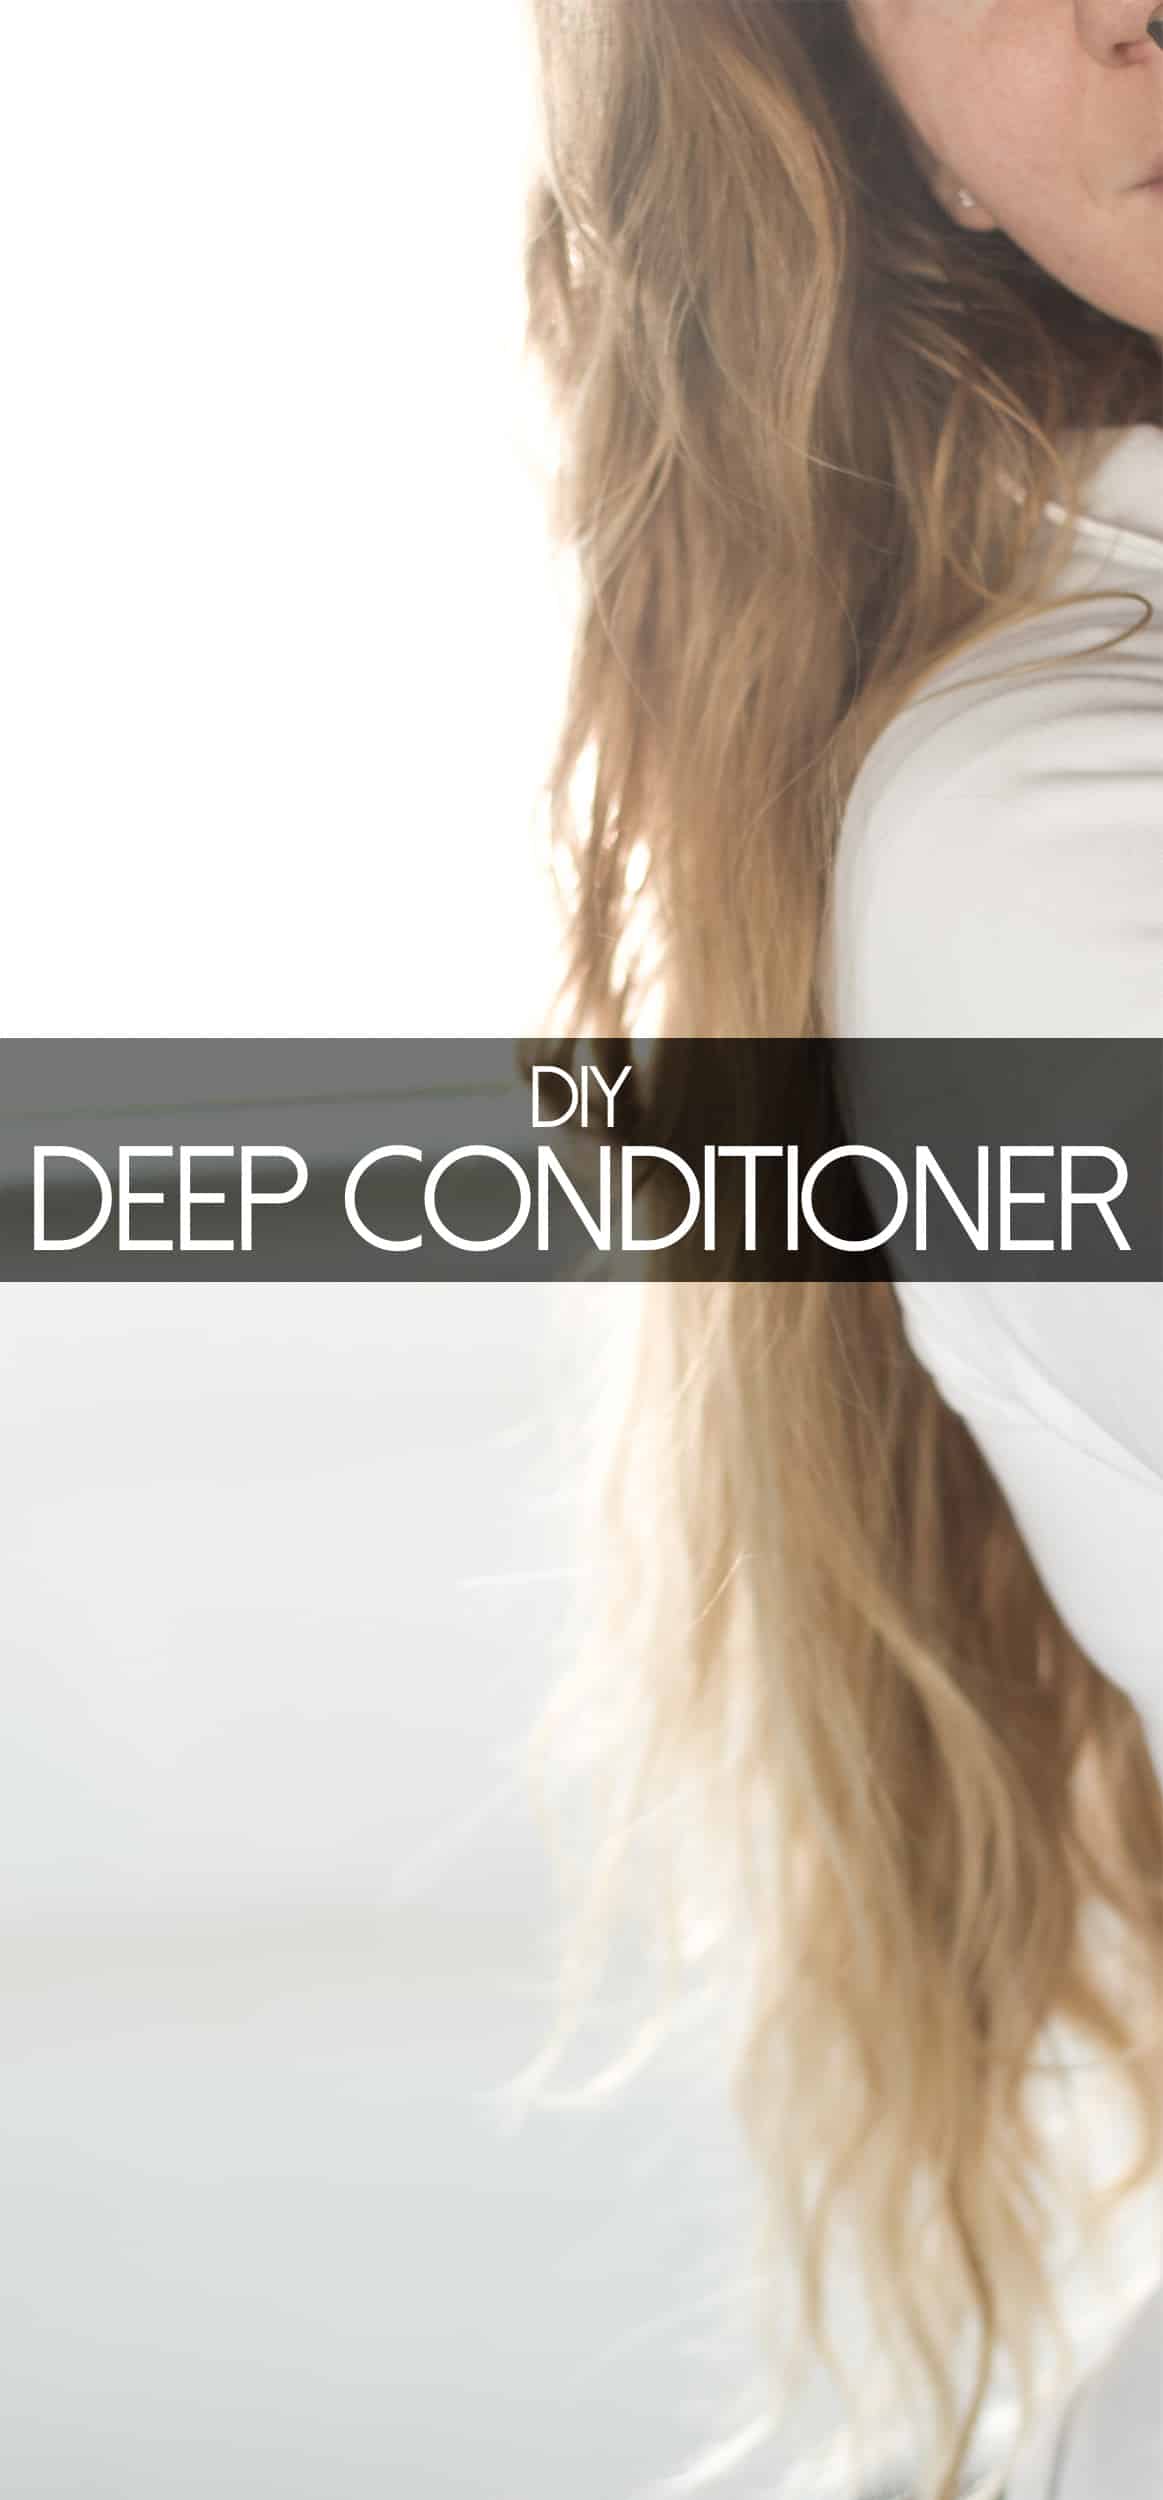 Whip up this easy DIY deep conditioner recipe to make your hair super soft and moisturized!